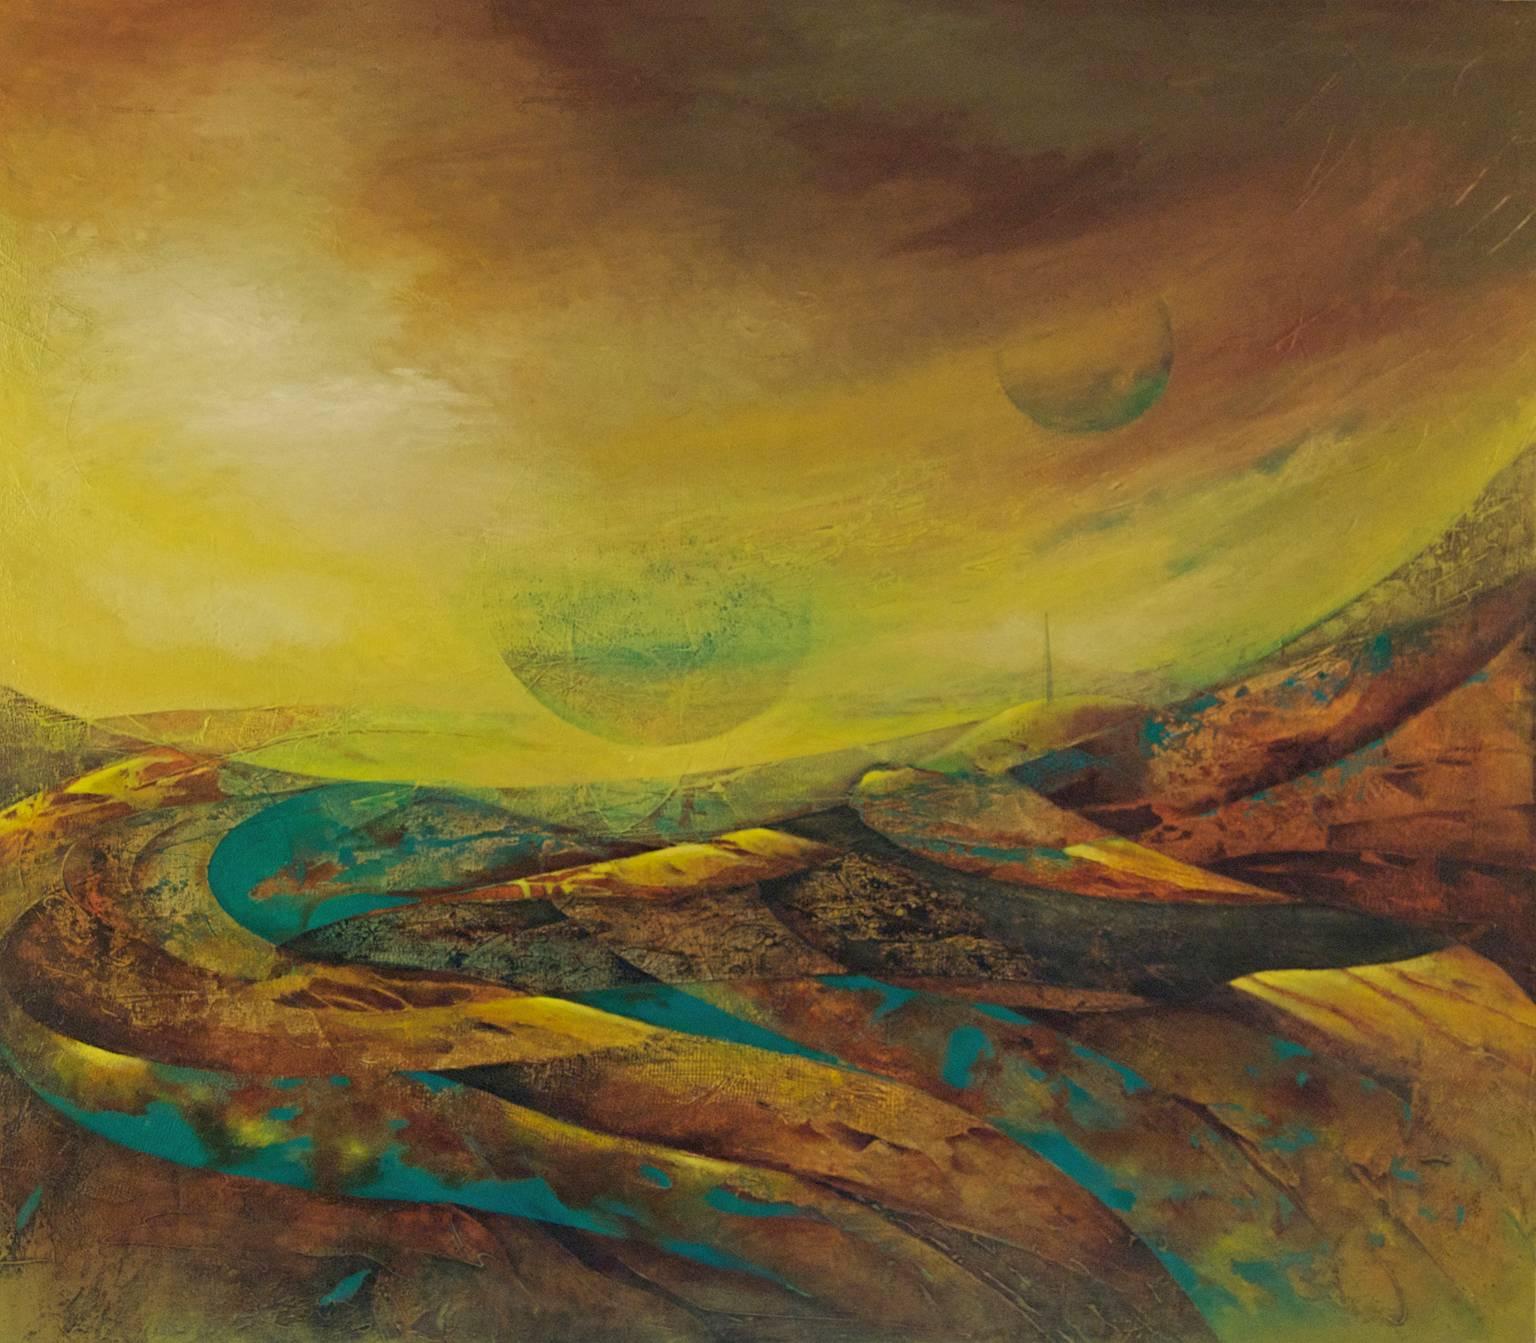 Kathleen Cammarata Abstract Painting - "Sagan's White Cloud"-Horizontal abstract landscape in yellow ochre & turquoise.